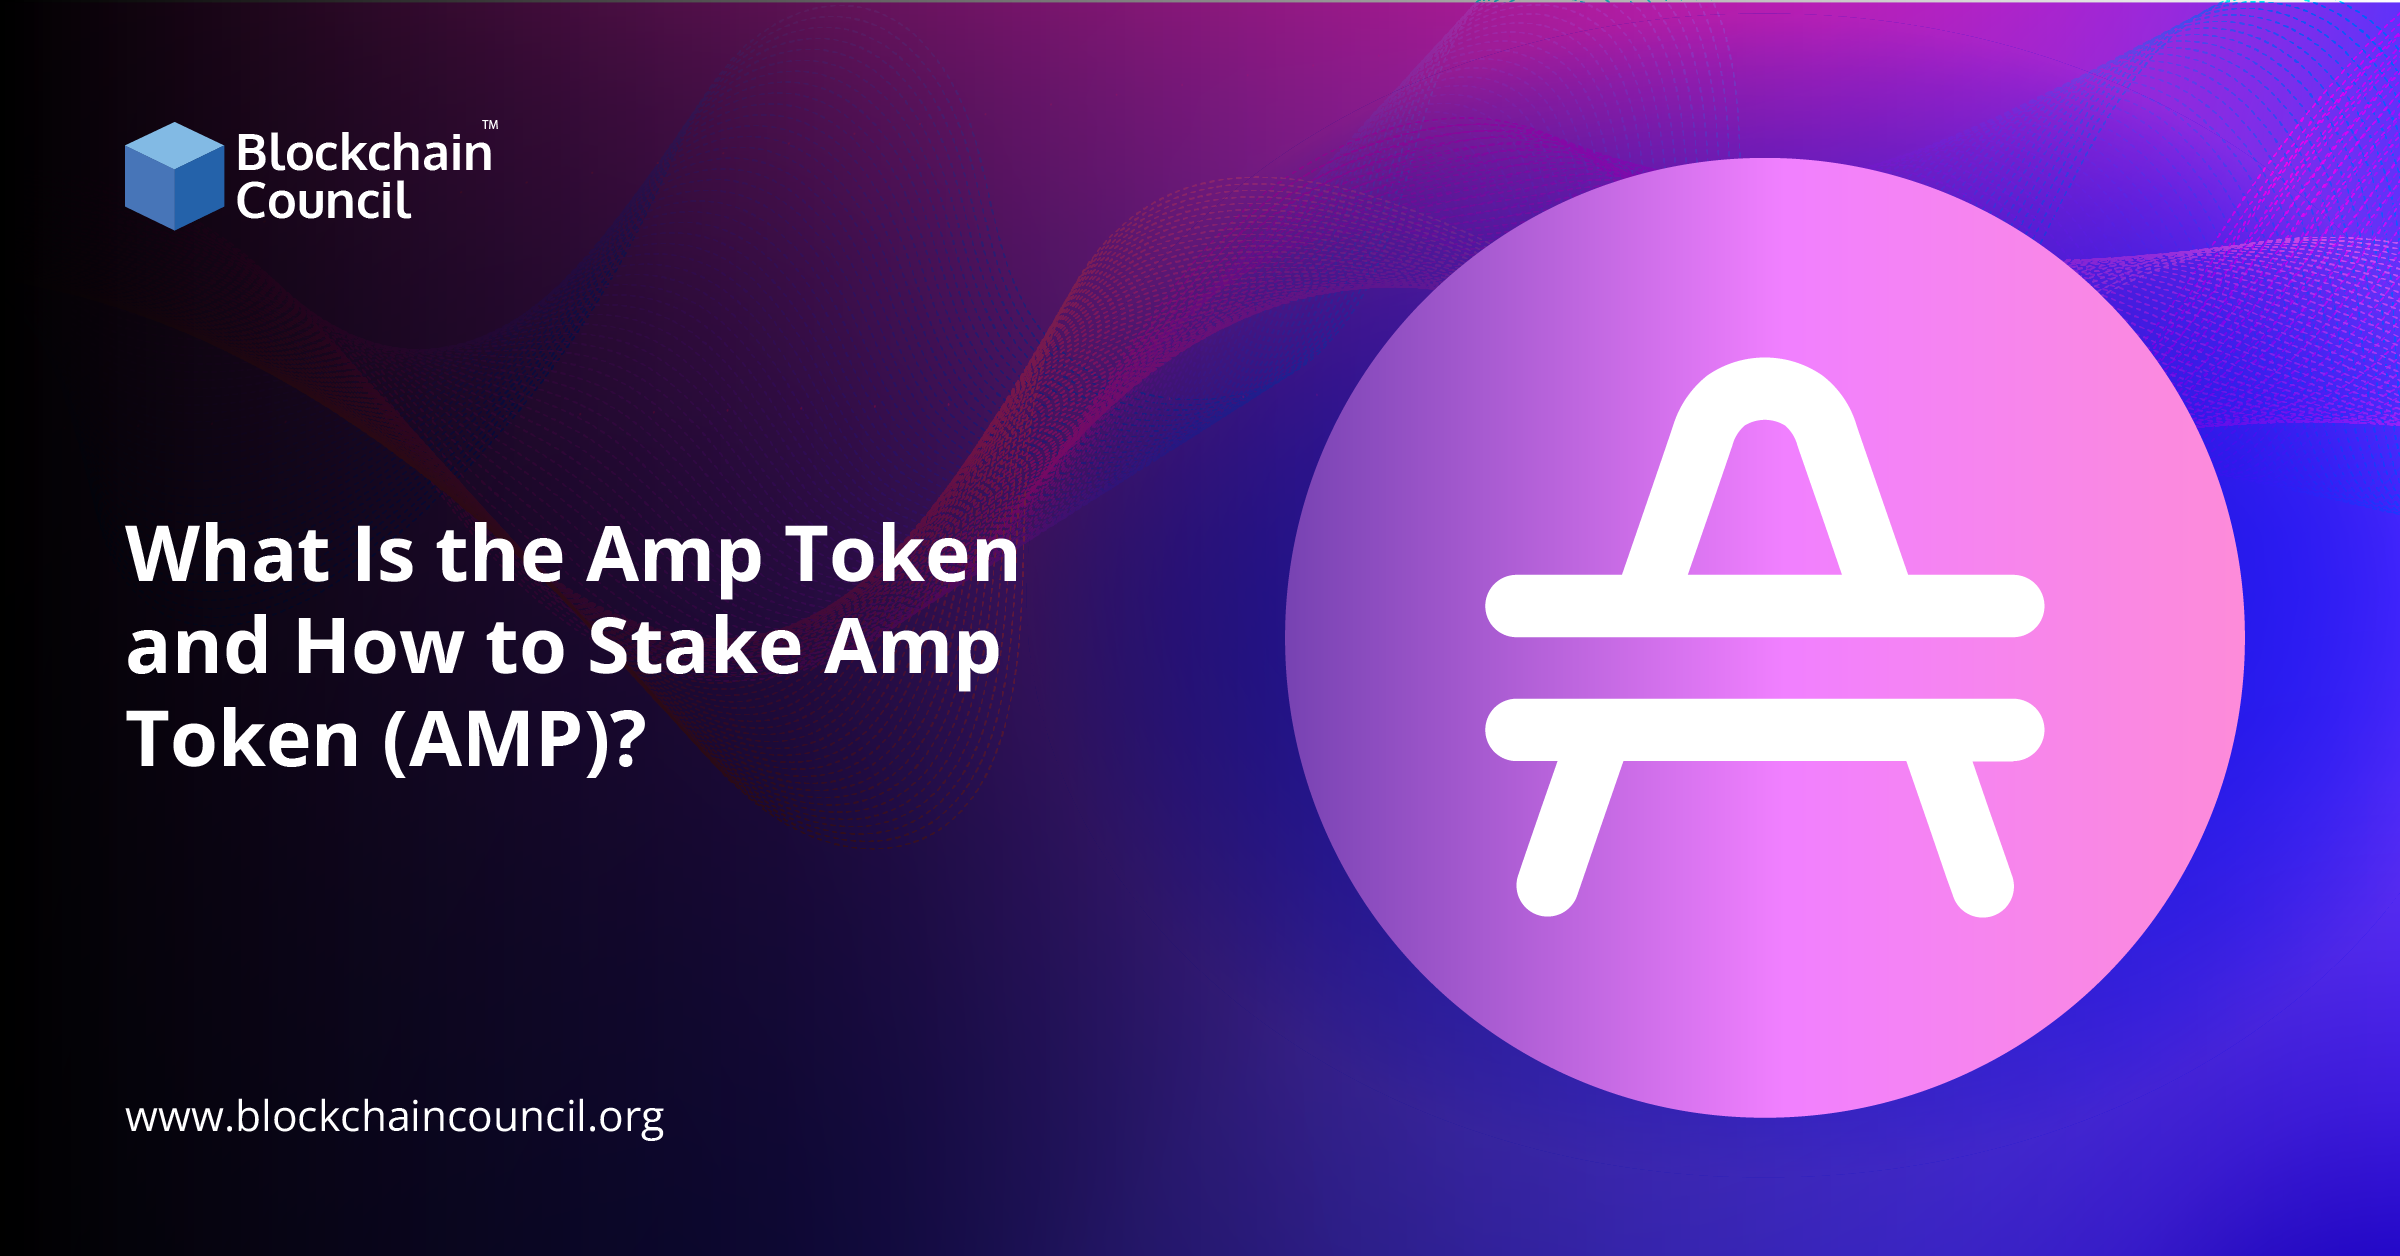 What Is the Amp Token and How to Stake Amp Token (AMP)